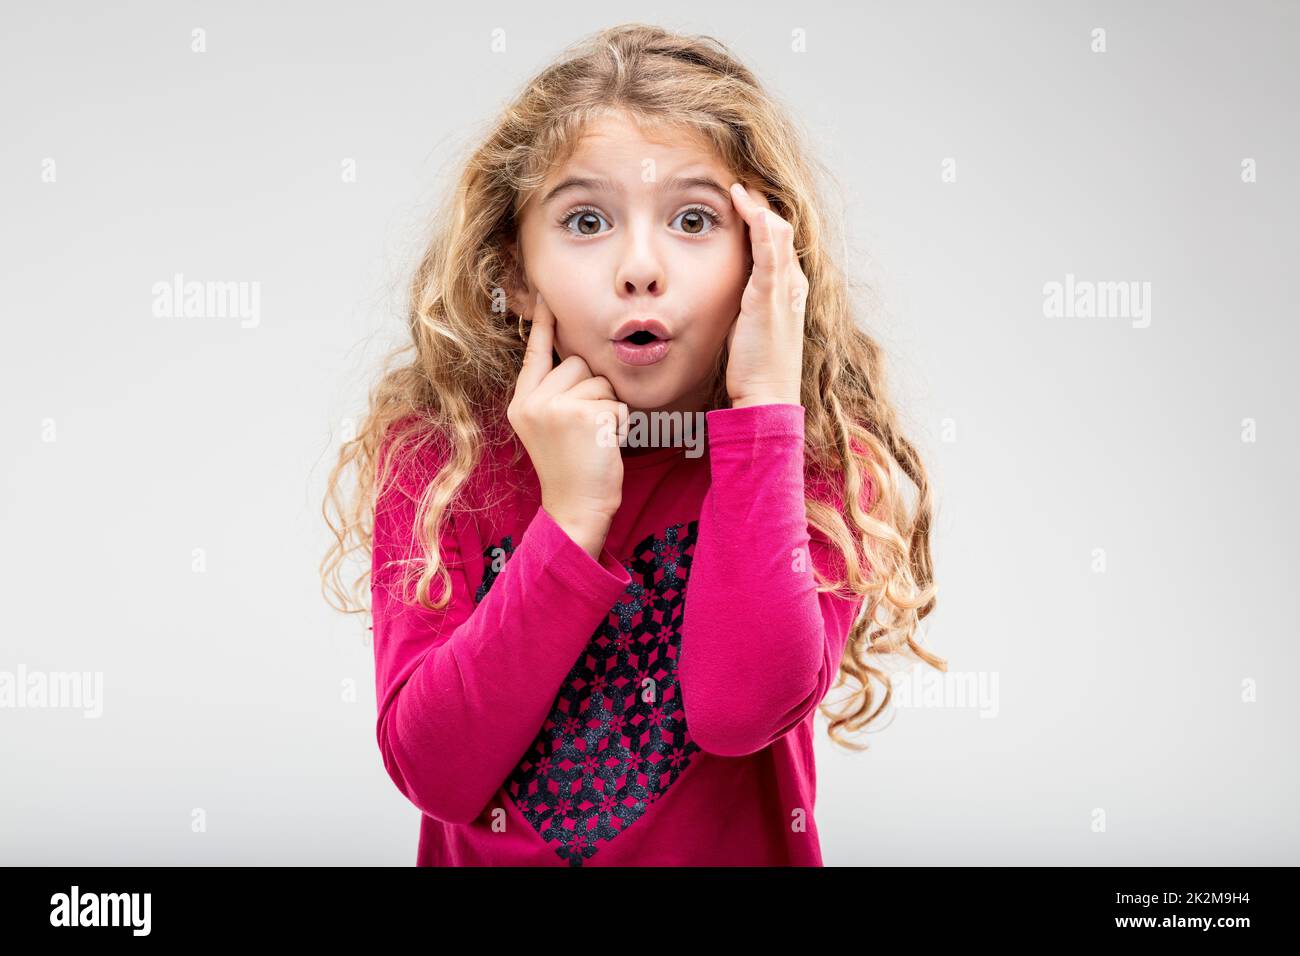 Cute little girl with a look of astonishment Stock Photo